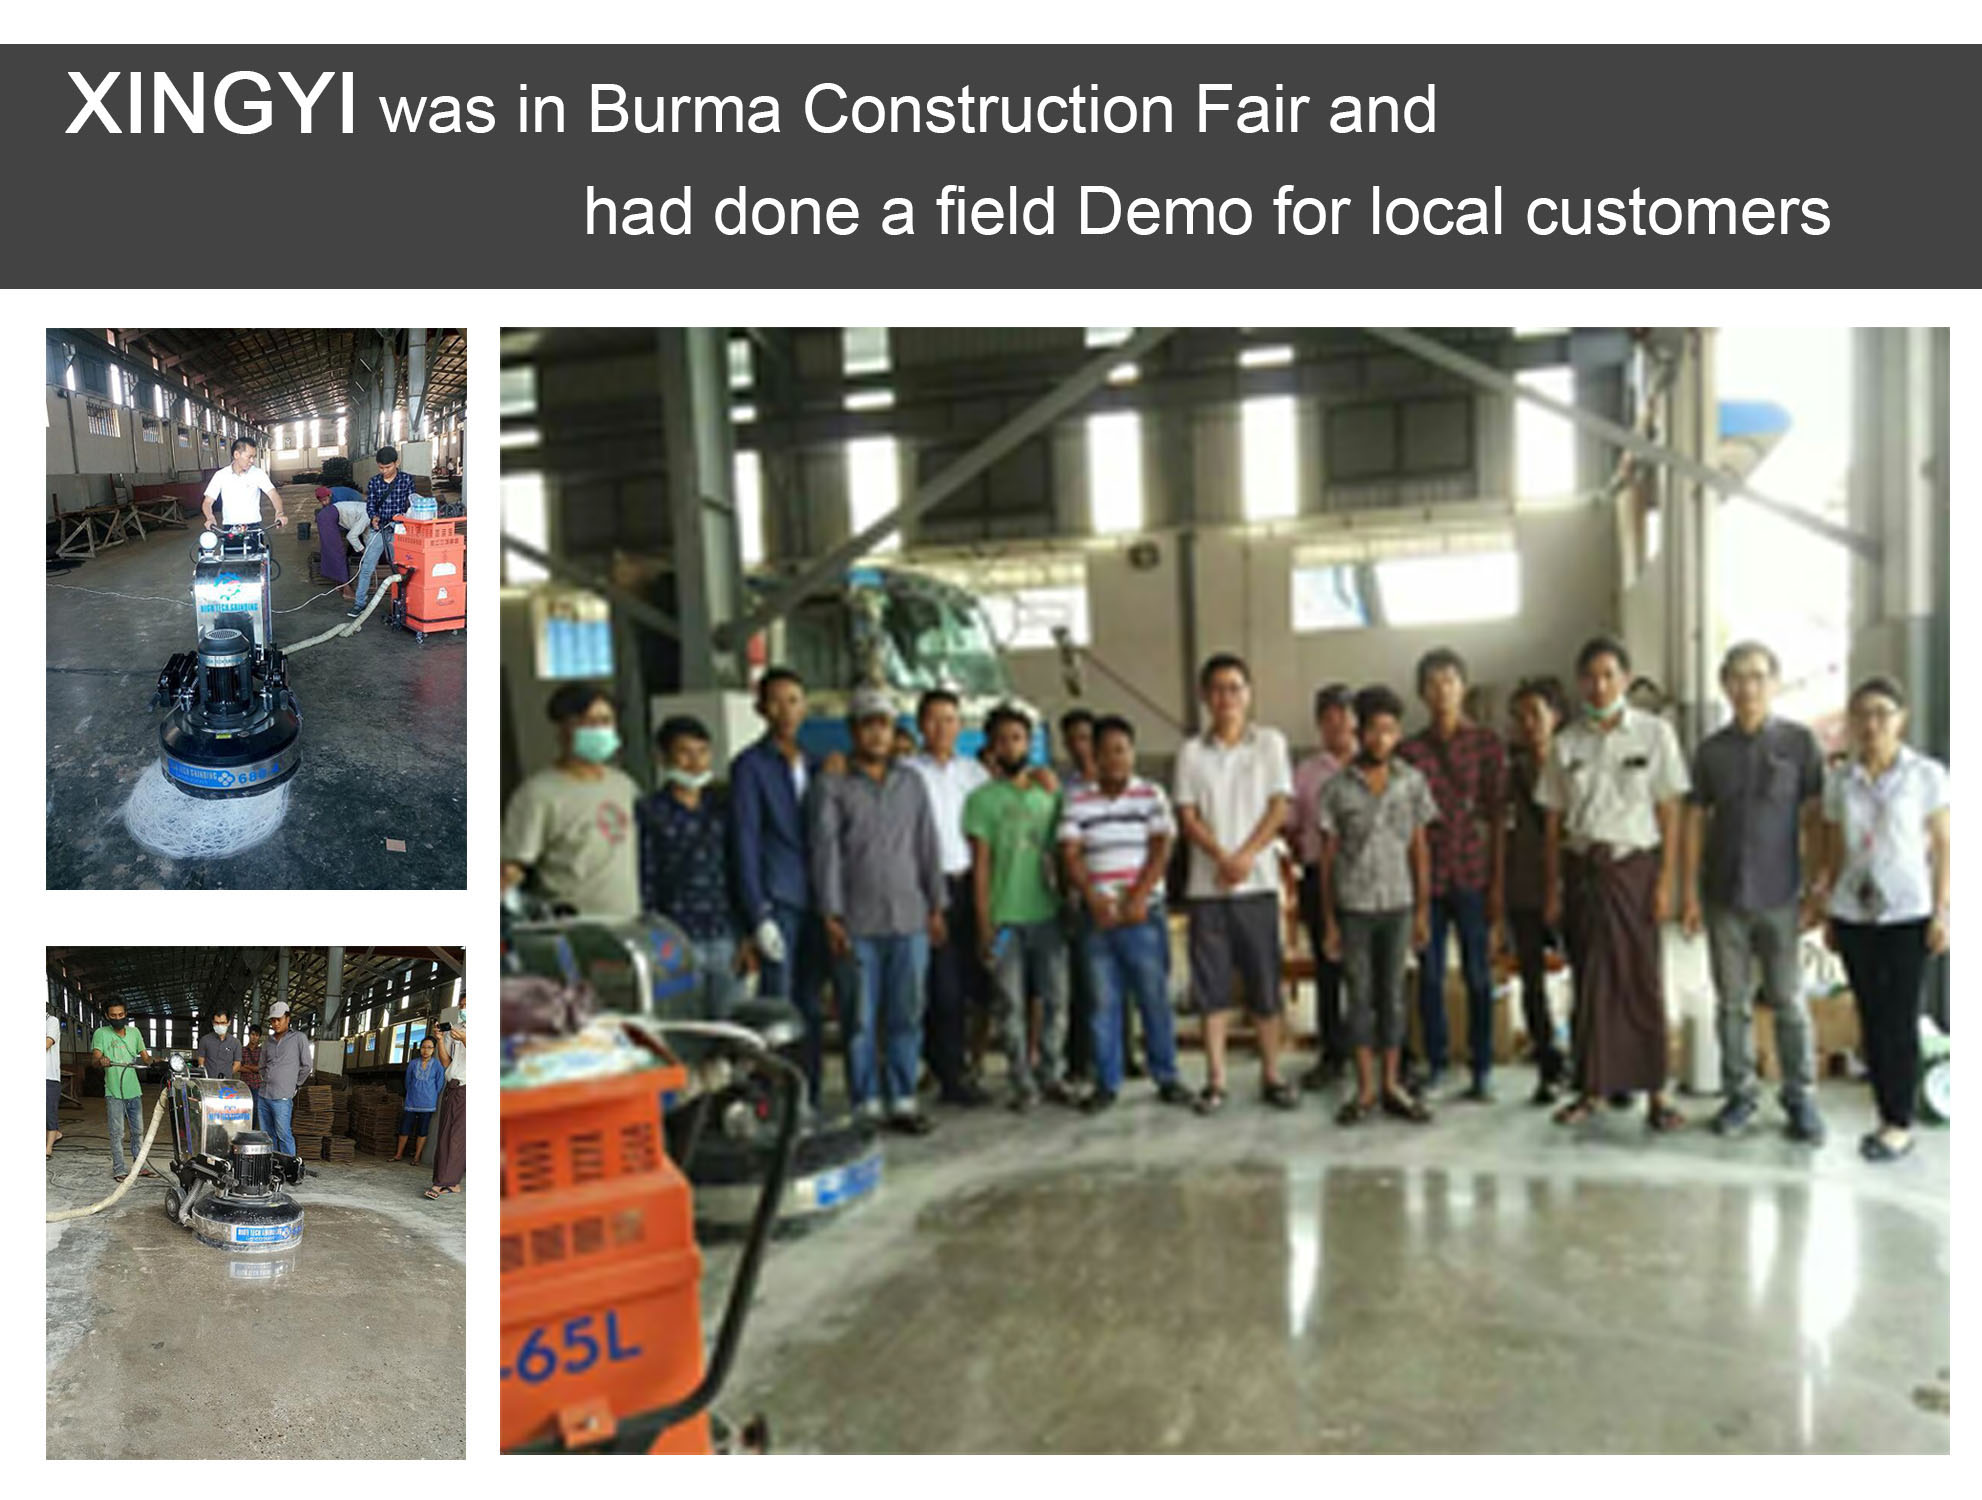 XINGYI was in Burma Construction Fair and had done a field Demo for local customers. 